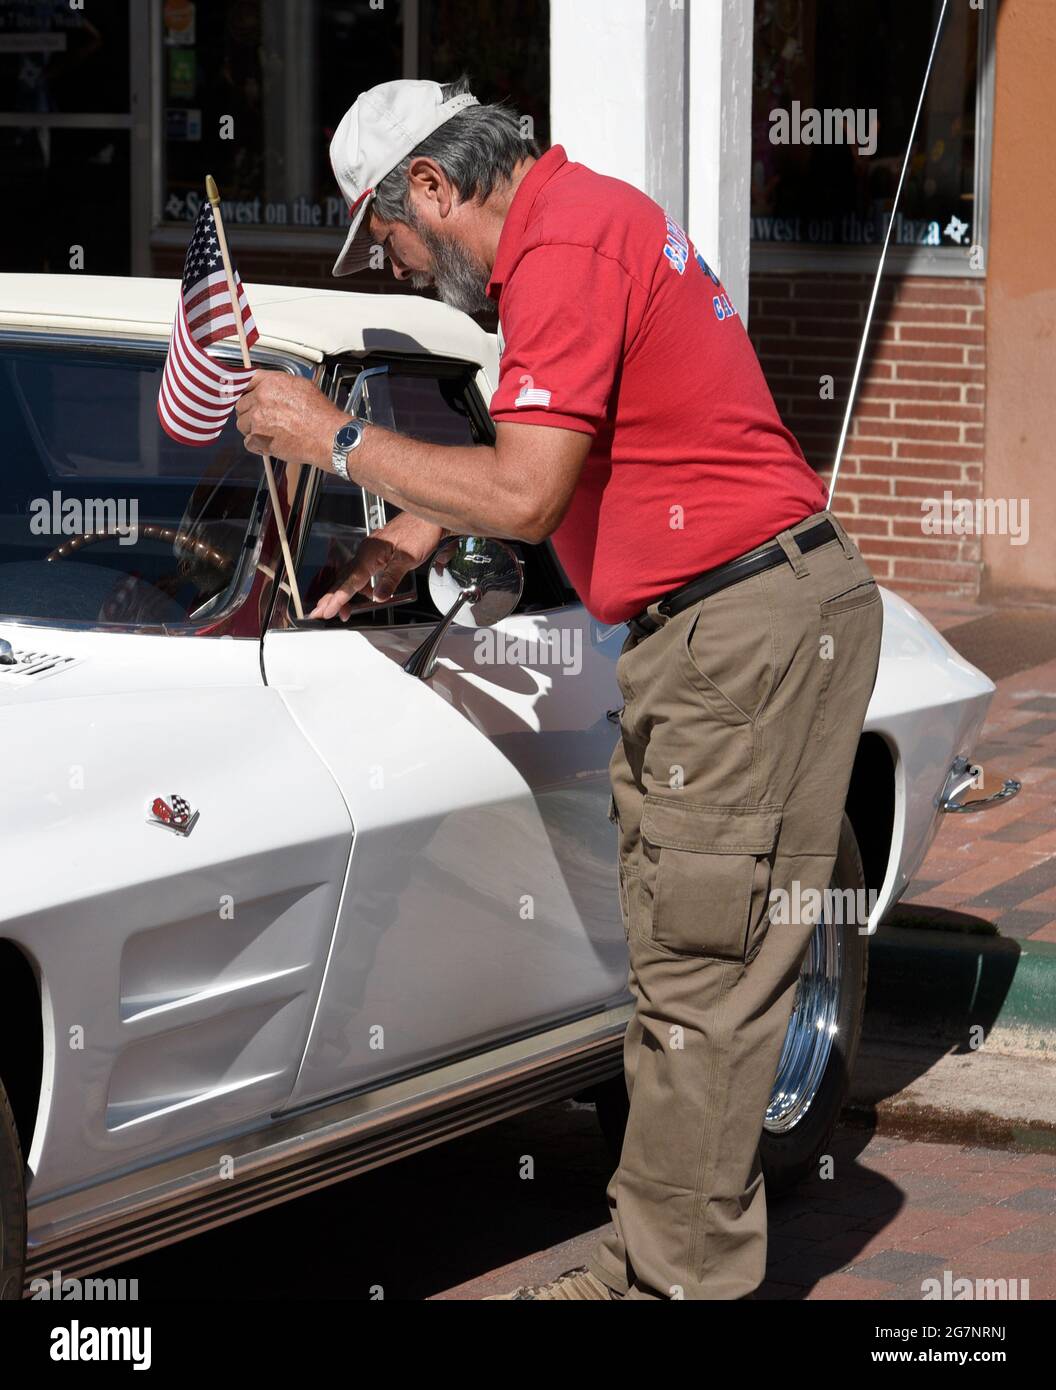 A man positions a small American flag on his classic 1960s Chevrolet Corvette on display at a Fourth of July car show in Santa Fe, New Mexico. Stock Photo